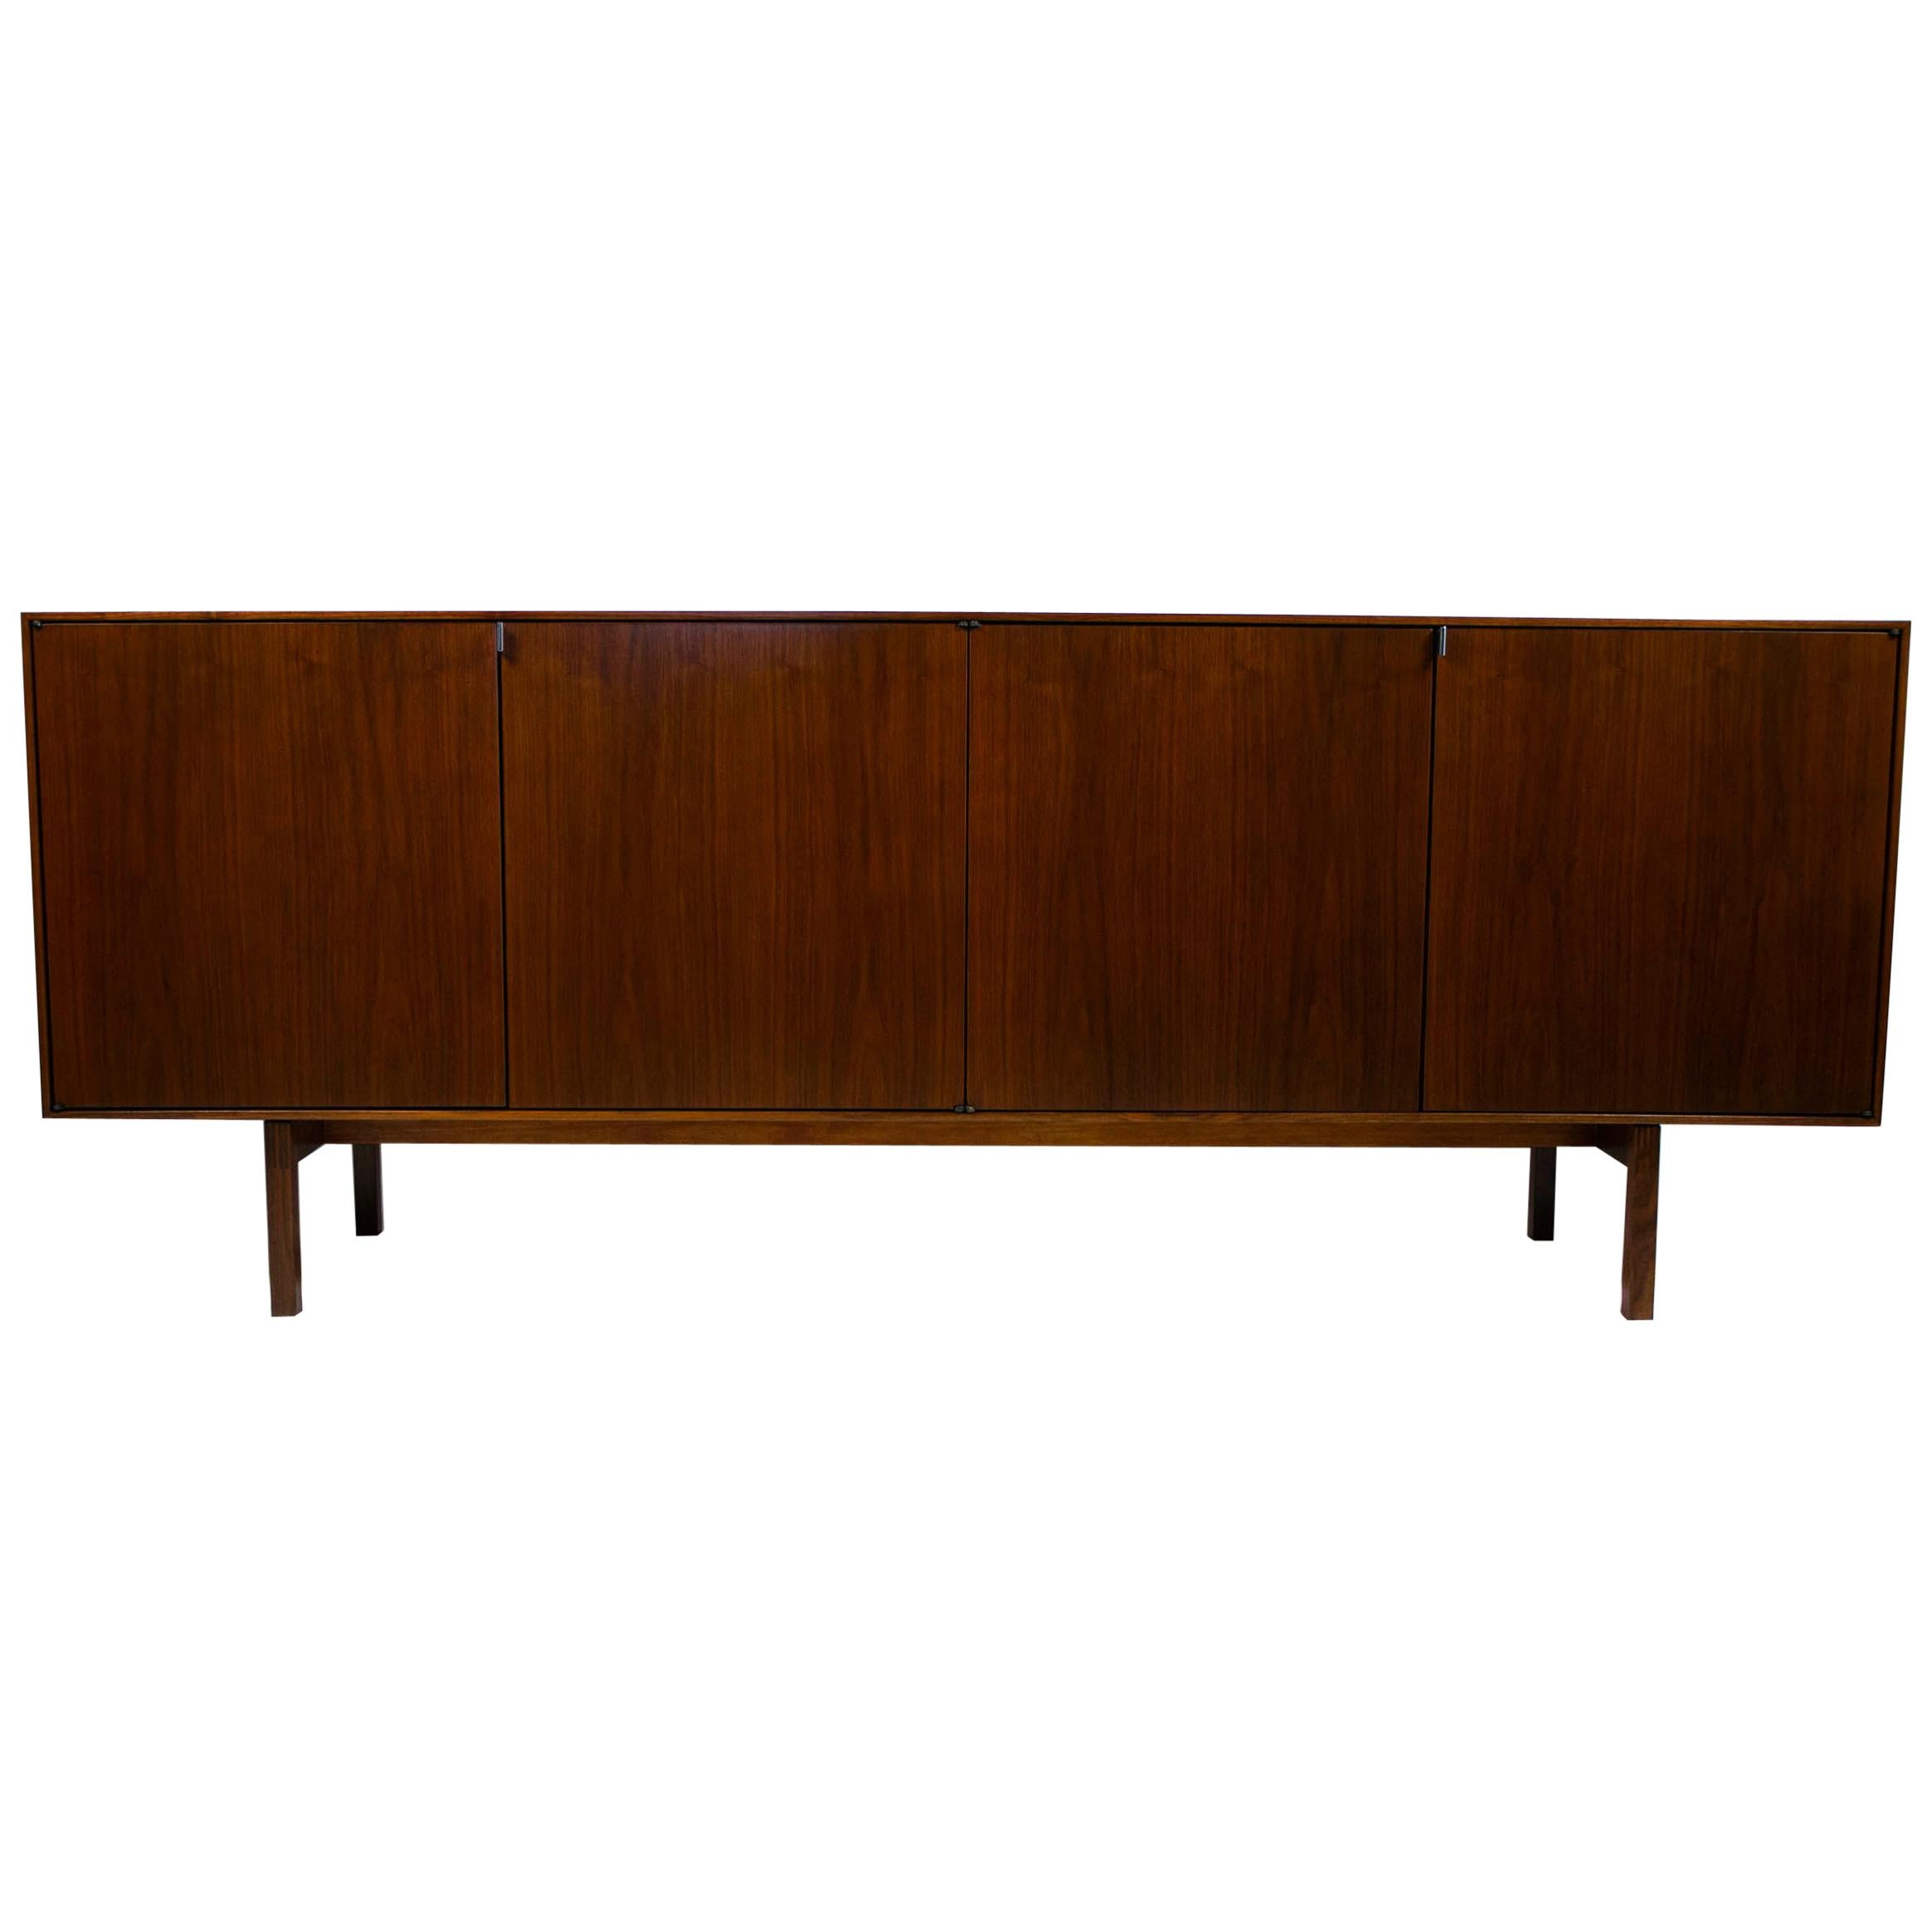 1950s Florence Knoll Cabinet in Walnut with Maple Interior Model No. 541